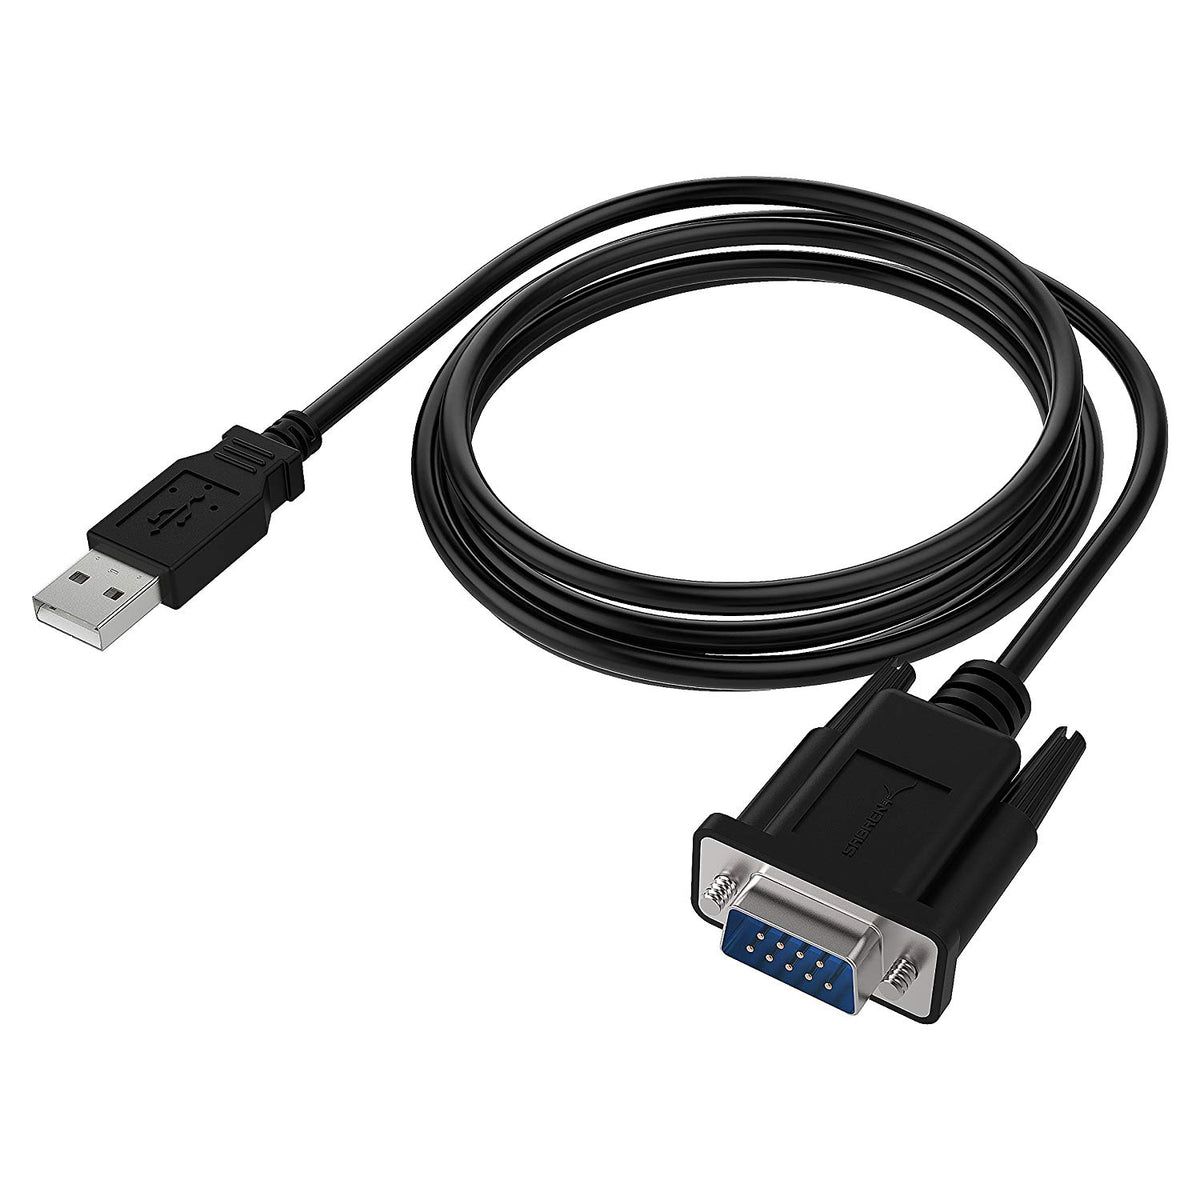 USB 2.0 to Serial (9-Pin) DB-9 RS-232 Adapter Cable 6ft Cable